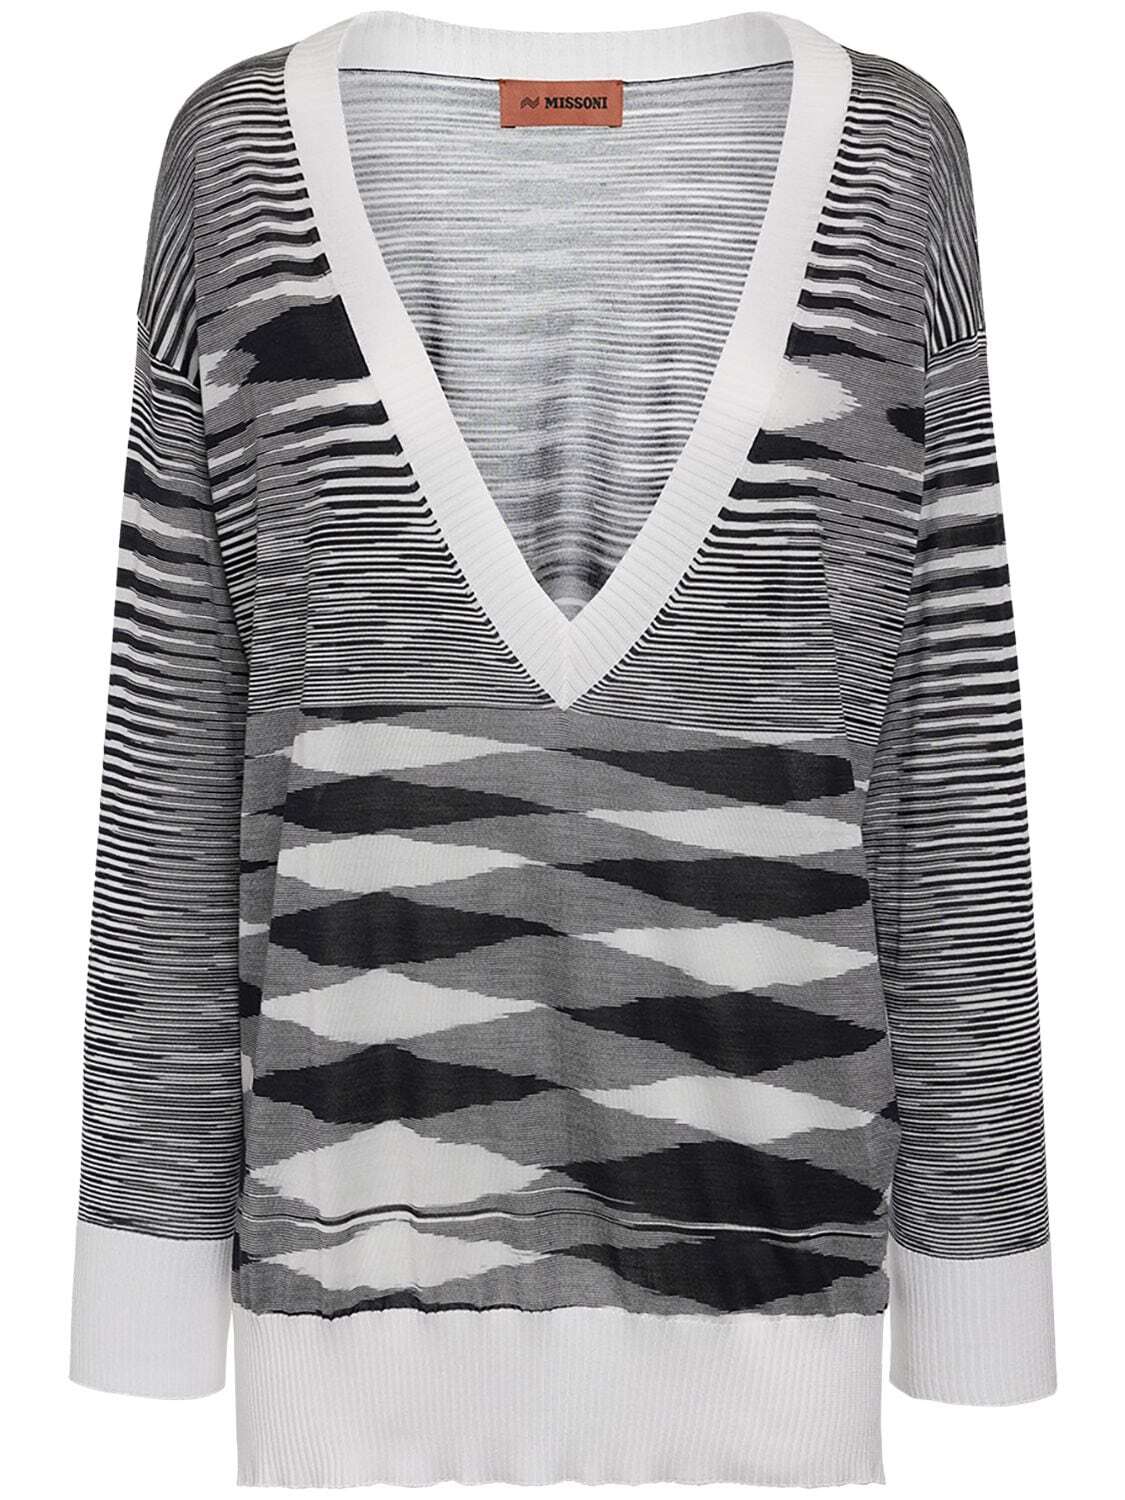 MISSONI Dyed Space V Neck Knit Sweater in black / white